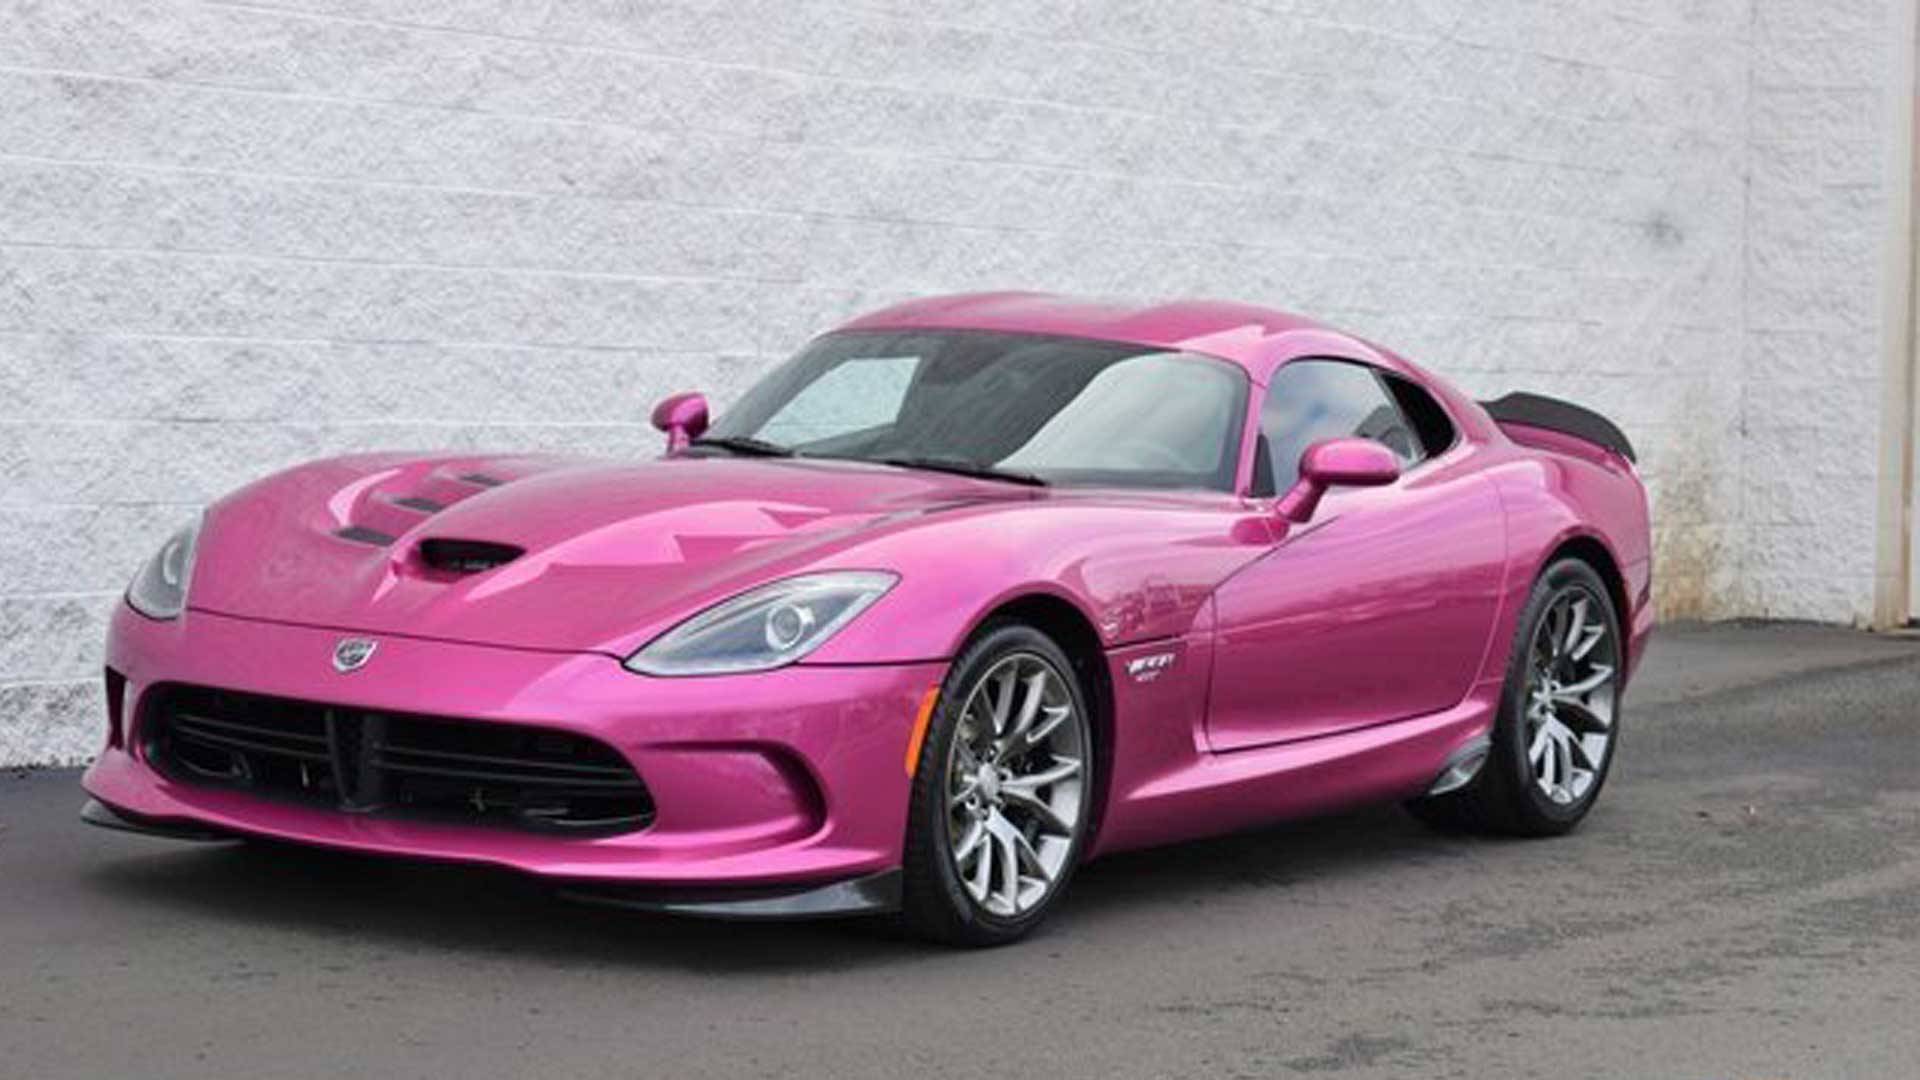 Dodge Viper Wears Factory Metallic Pink Paint, Selling For $155k